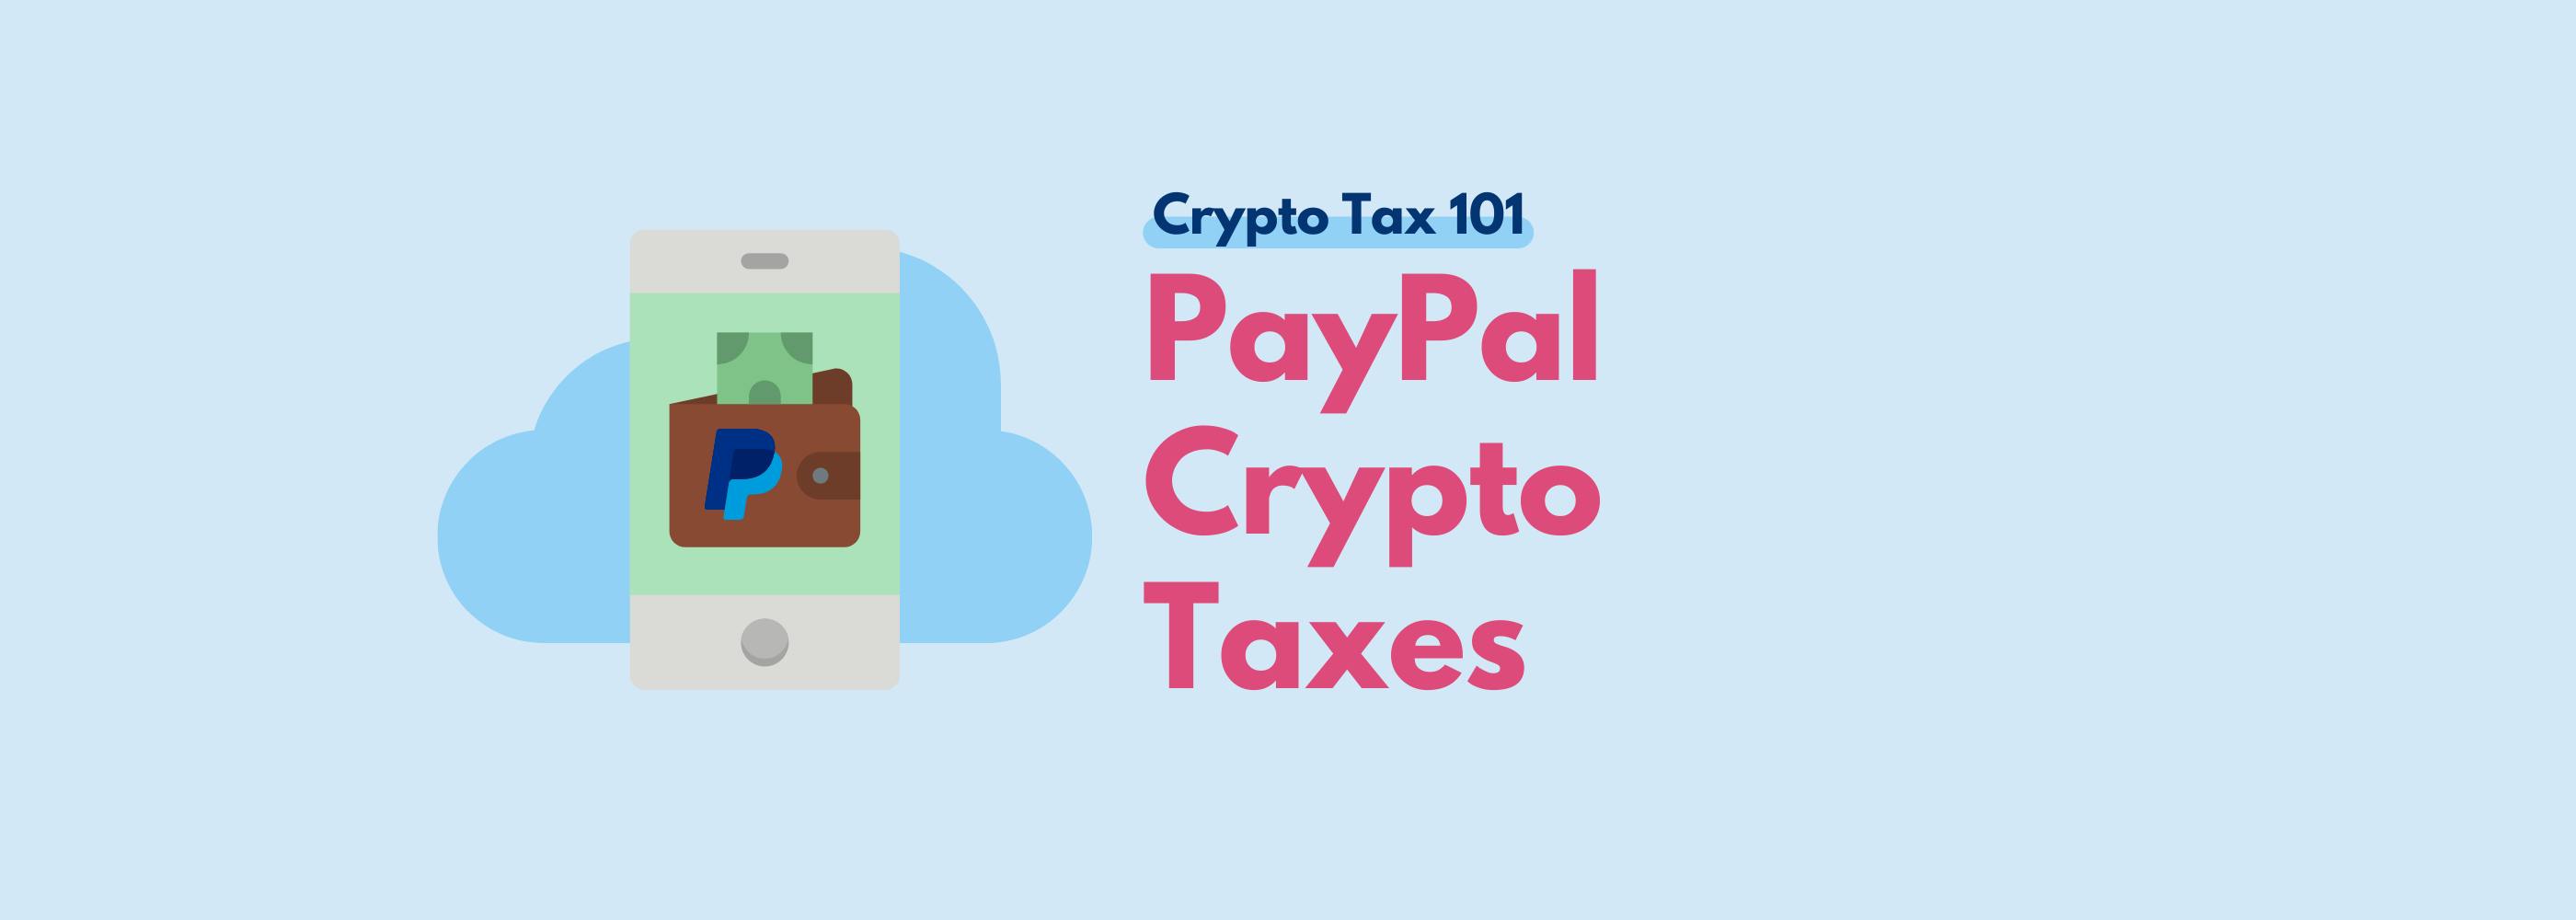 paypal crypto tax forms